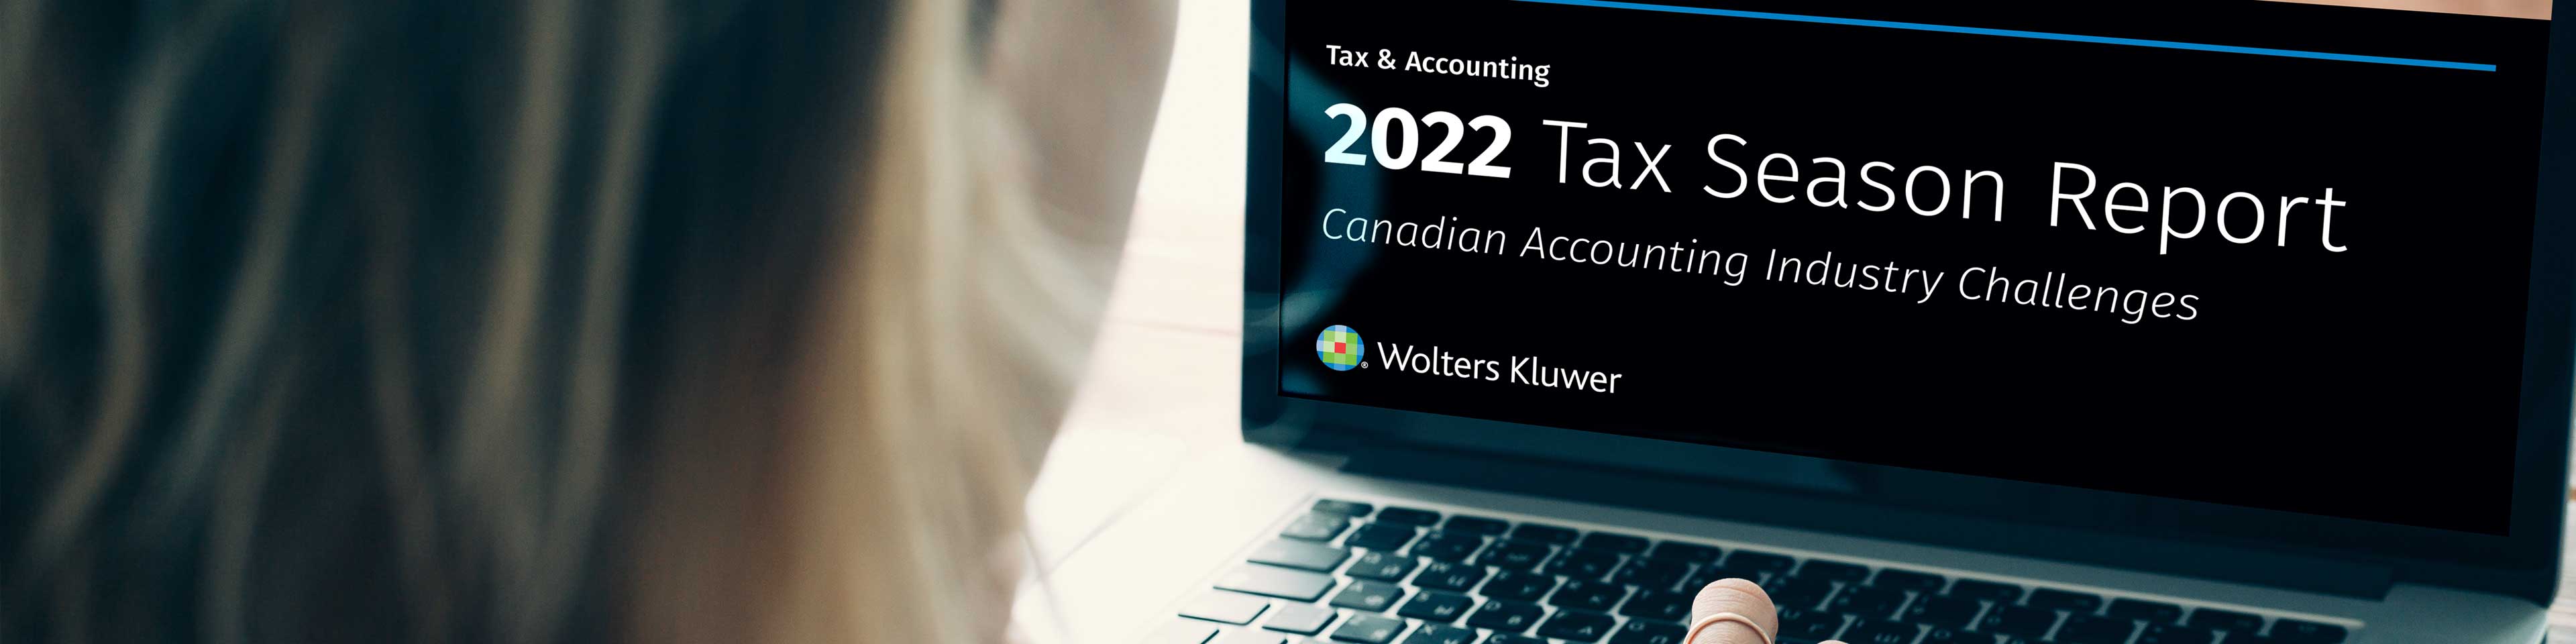 2022 Tax Season Report: Canadian Accounting Industry Challenges